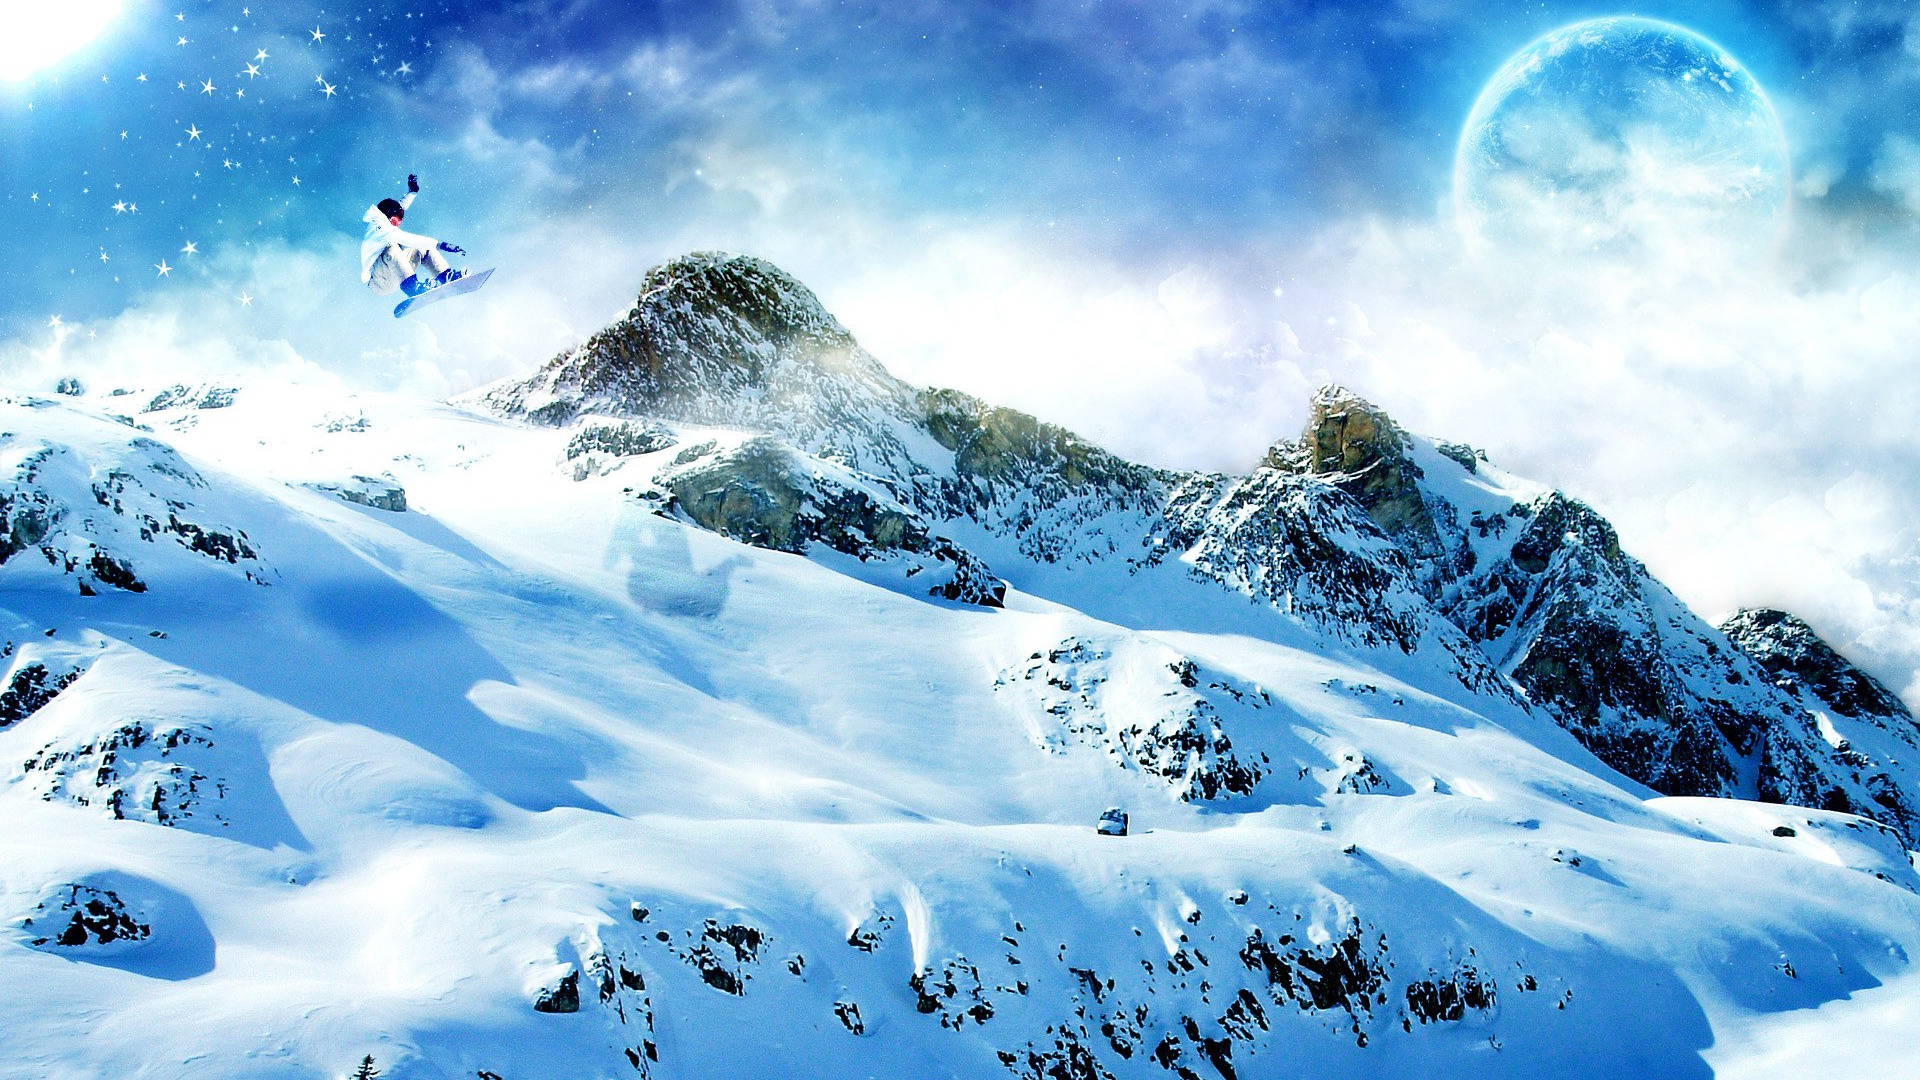 Planet over snowy mountains wallpaper 7570 1920x1080